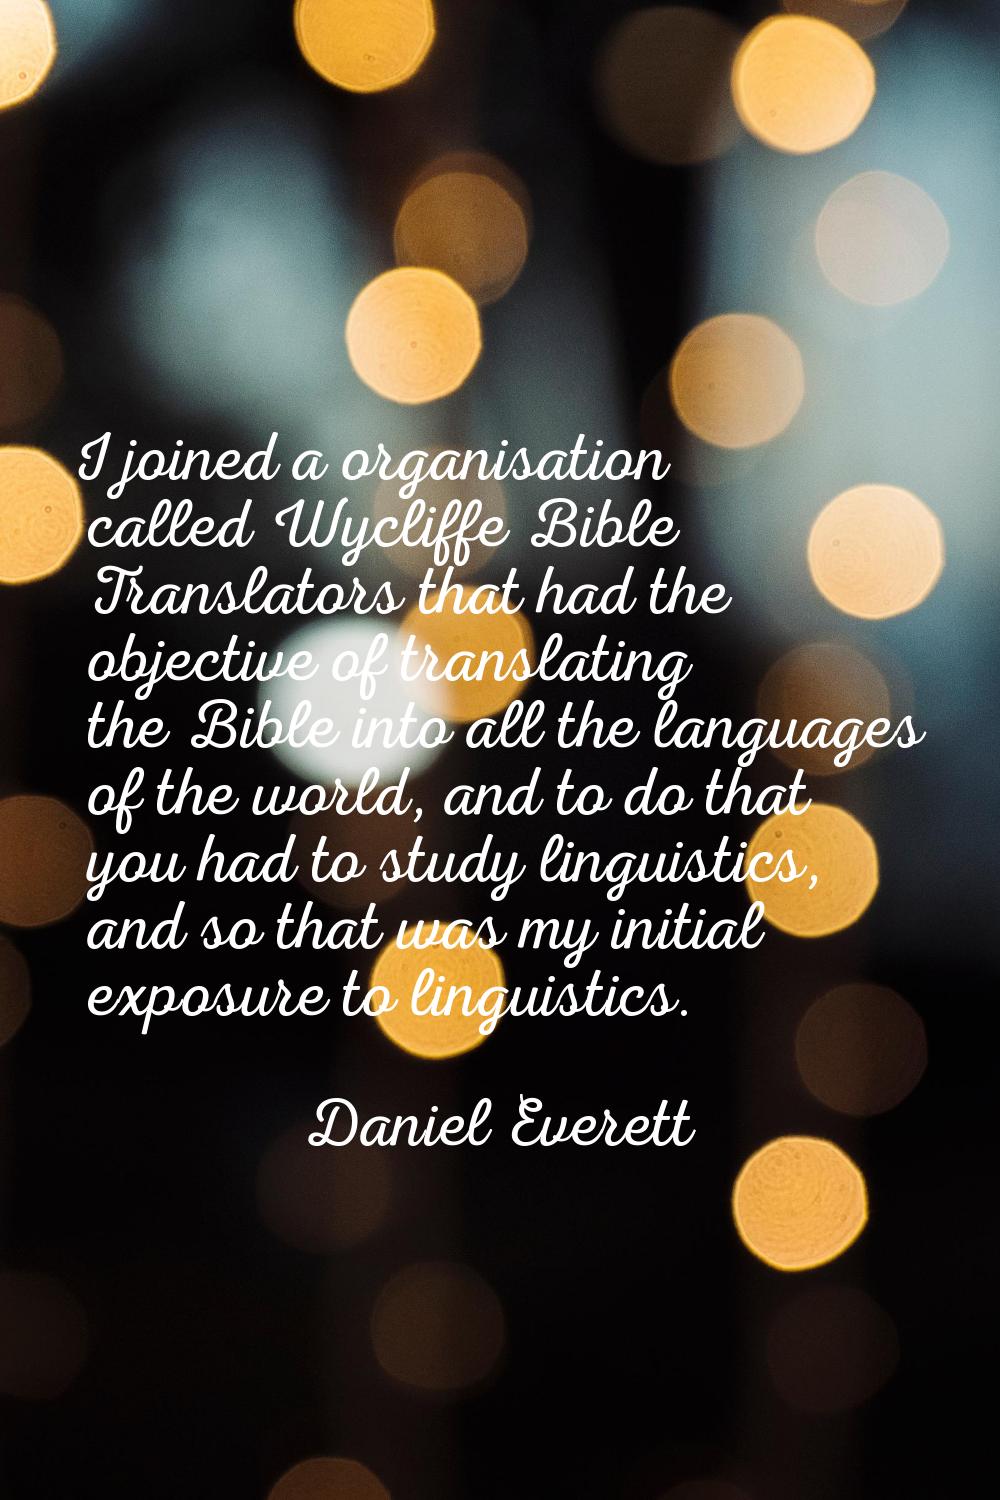 I joined a organisation called Wycliffe Bible Translators that had the objective of translating the